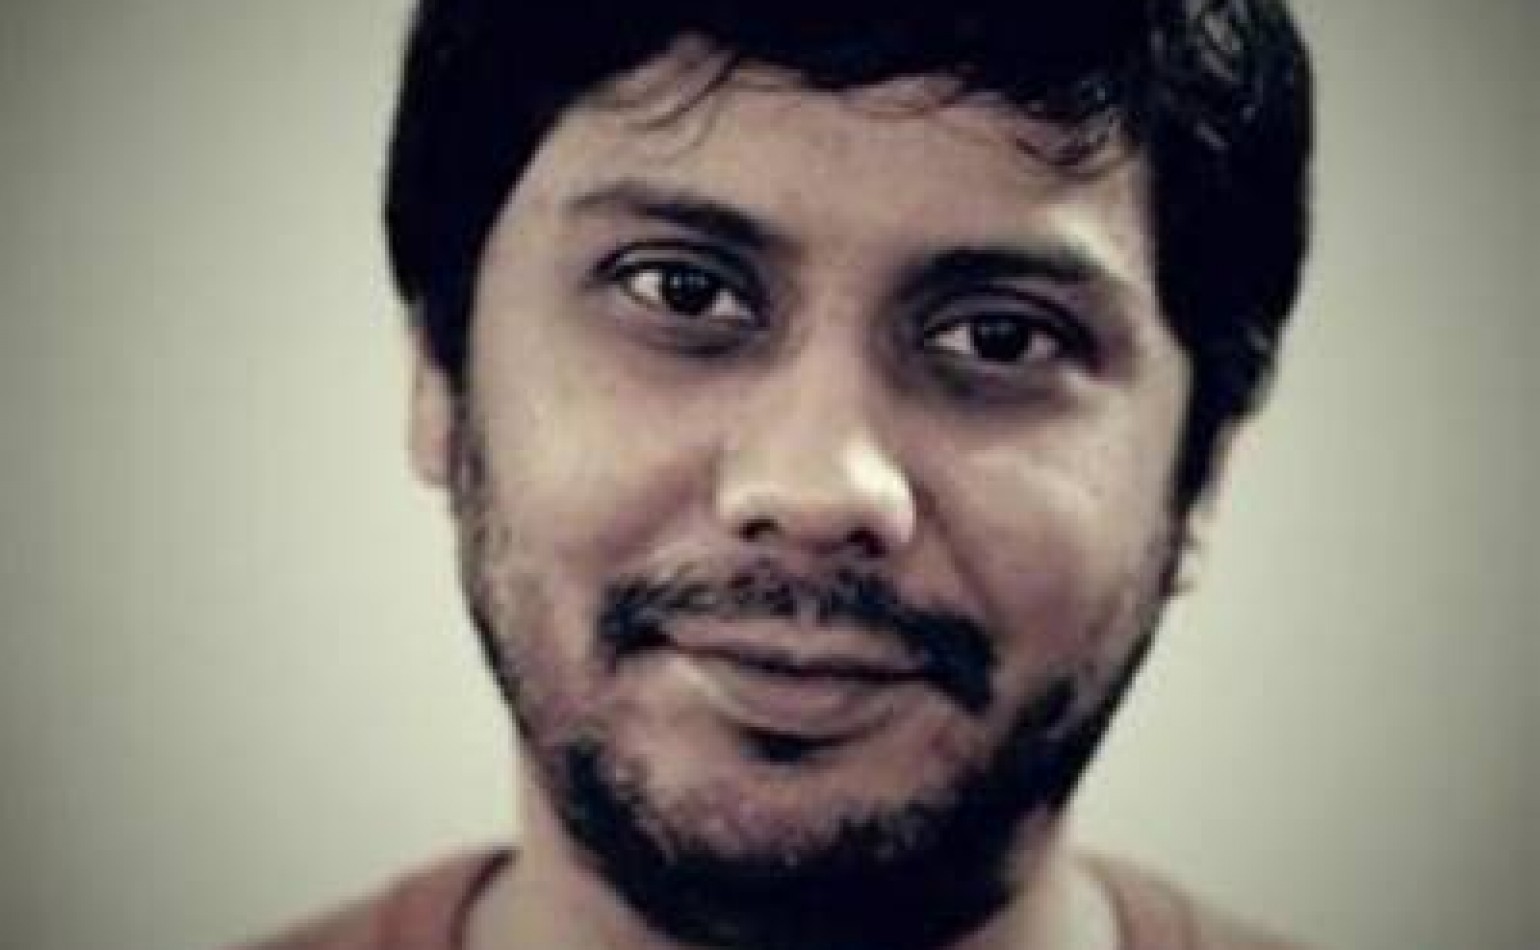 Journalism is not a crime: Non-bailable arrest warrant for journalist Cyril Almeida raises concerns for free press